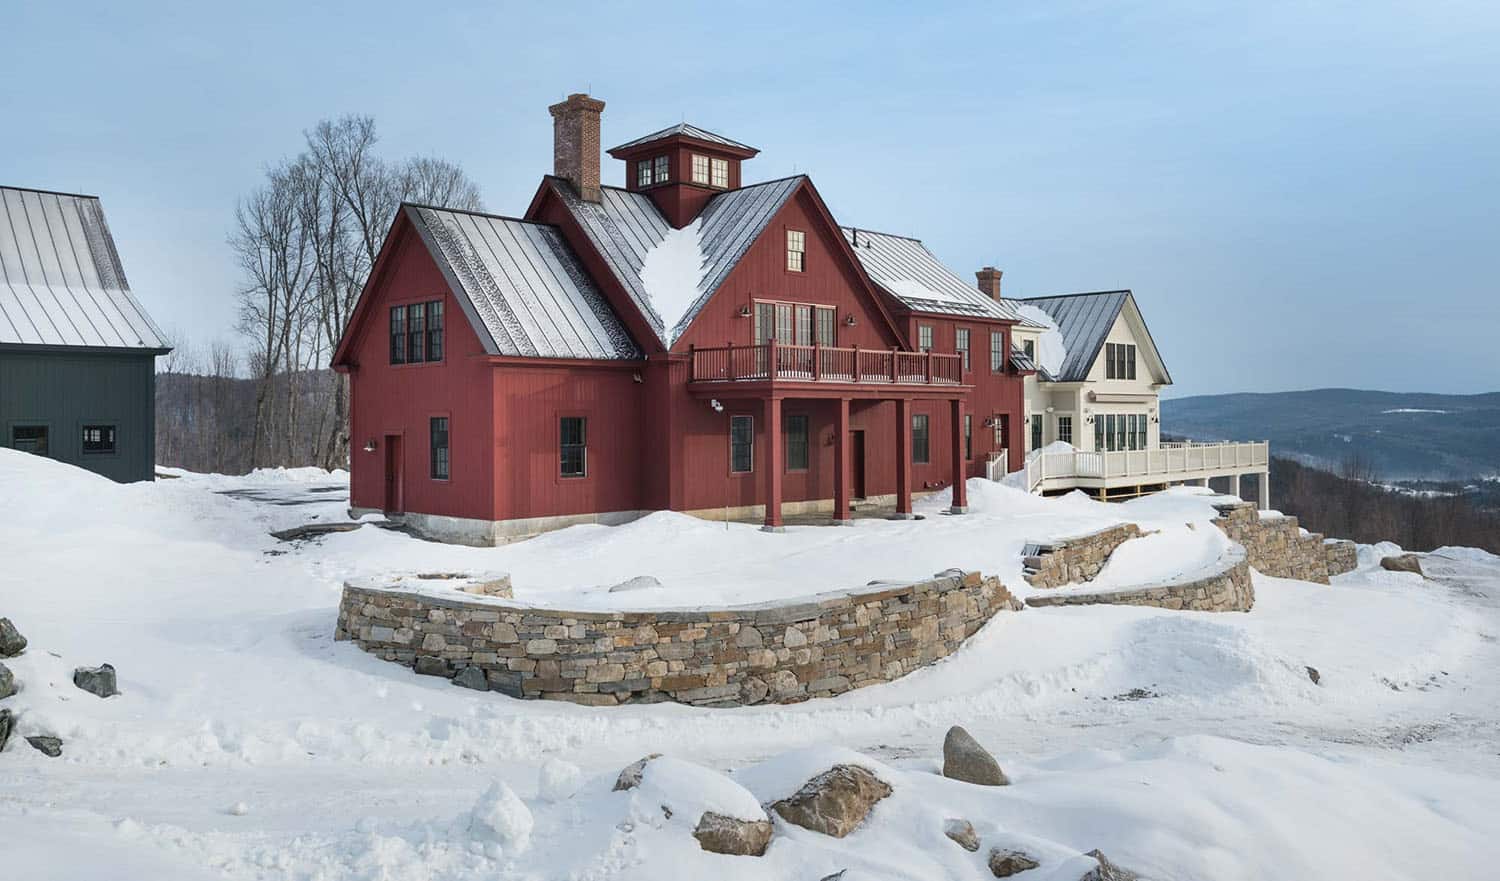 Tour this charming new old farmhouse in the mountains of Vermont